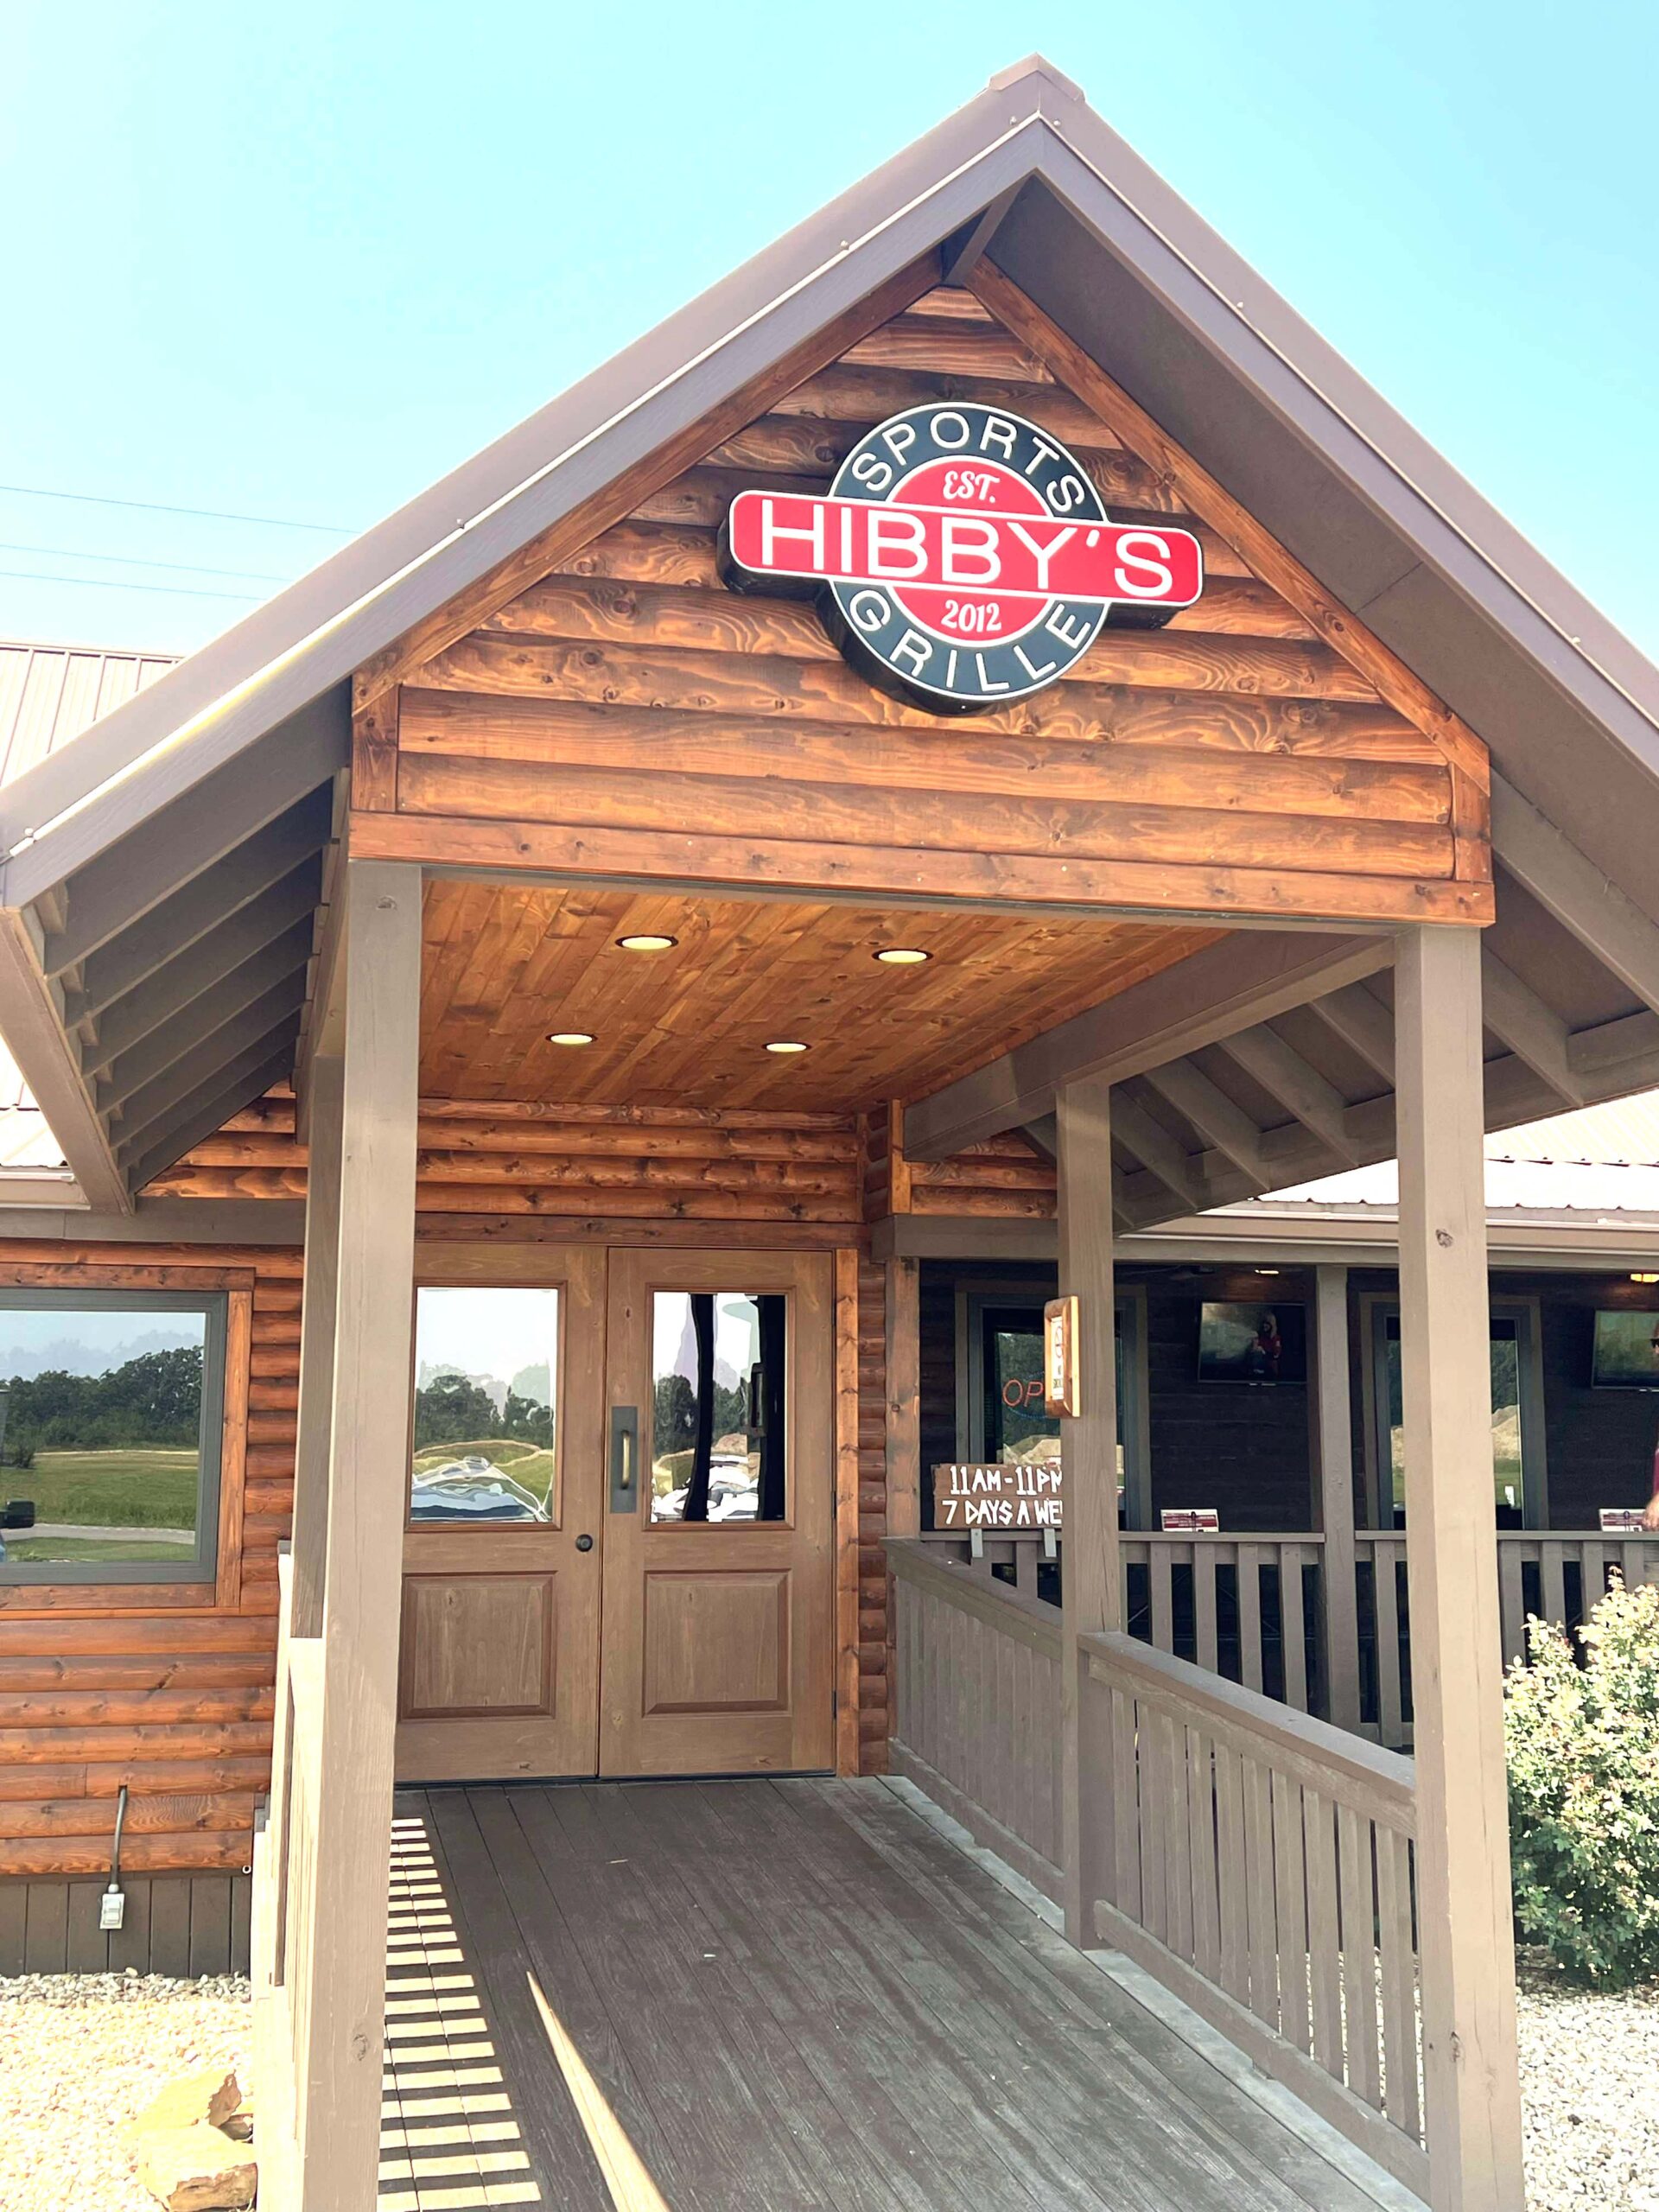 Hibby's Sports Grille